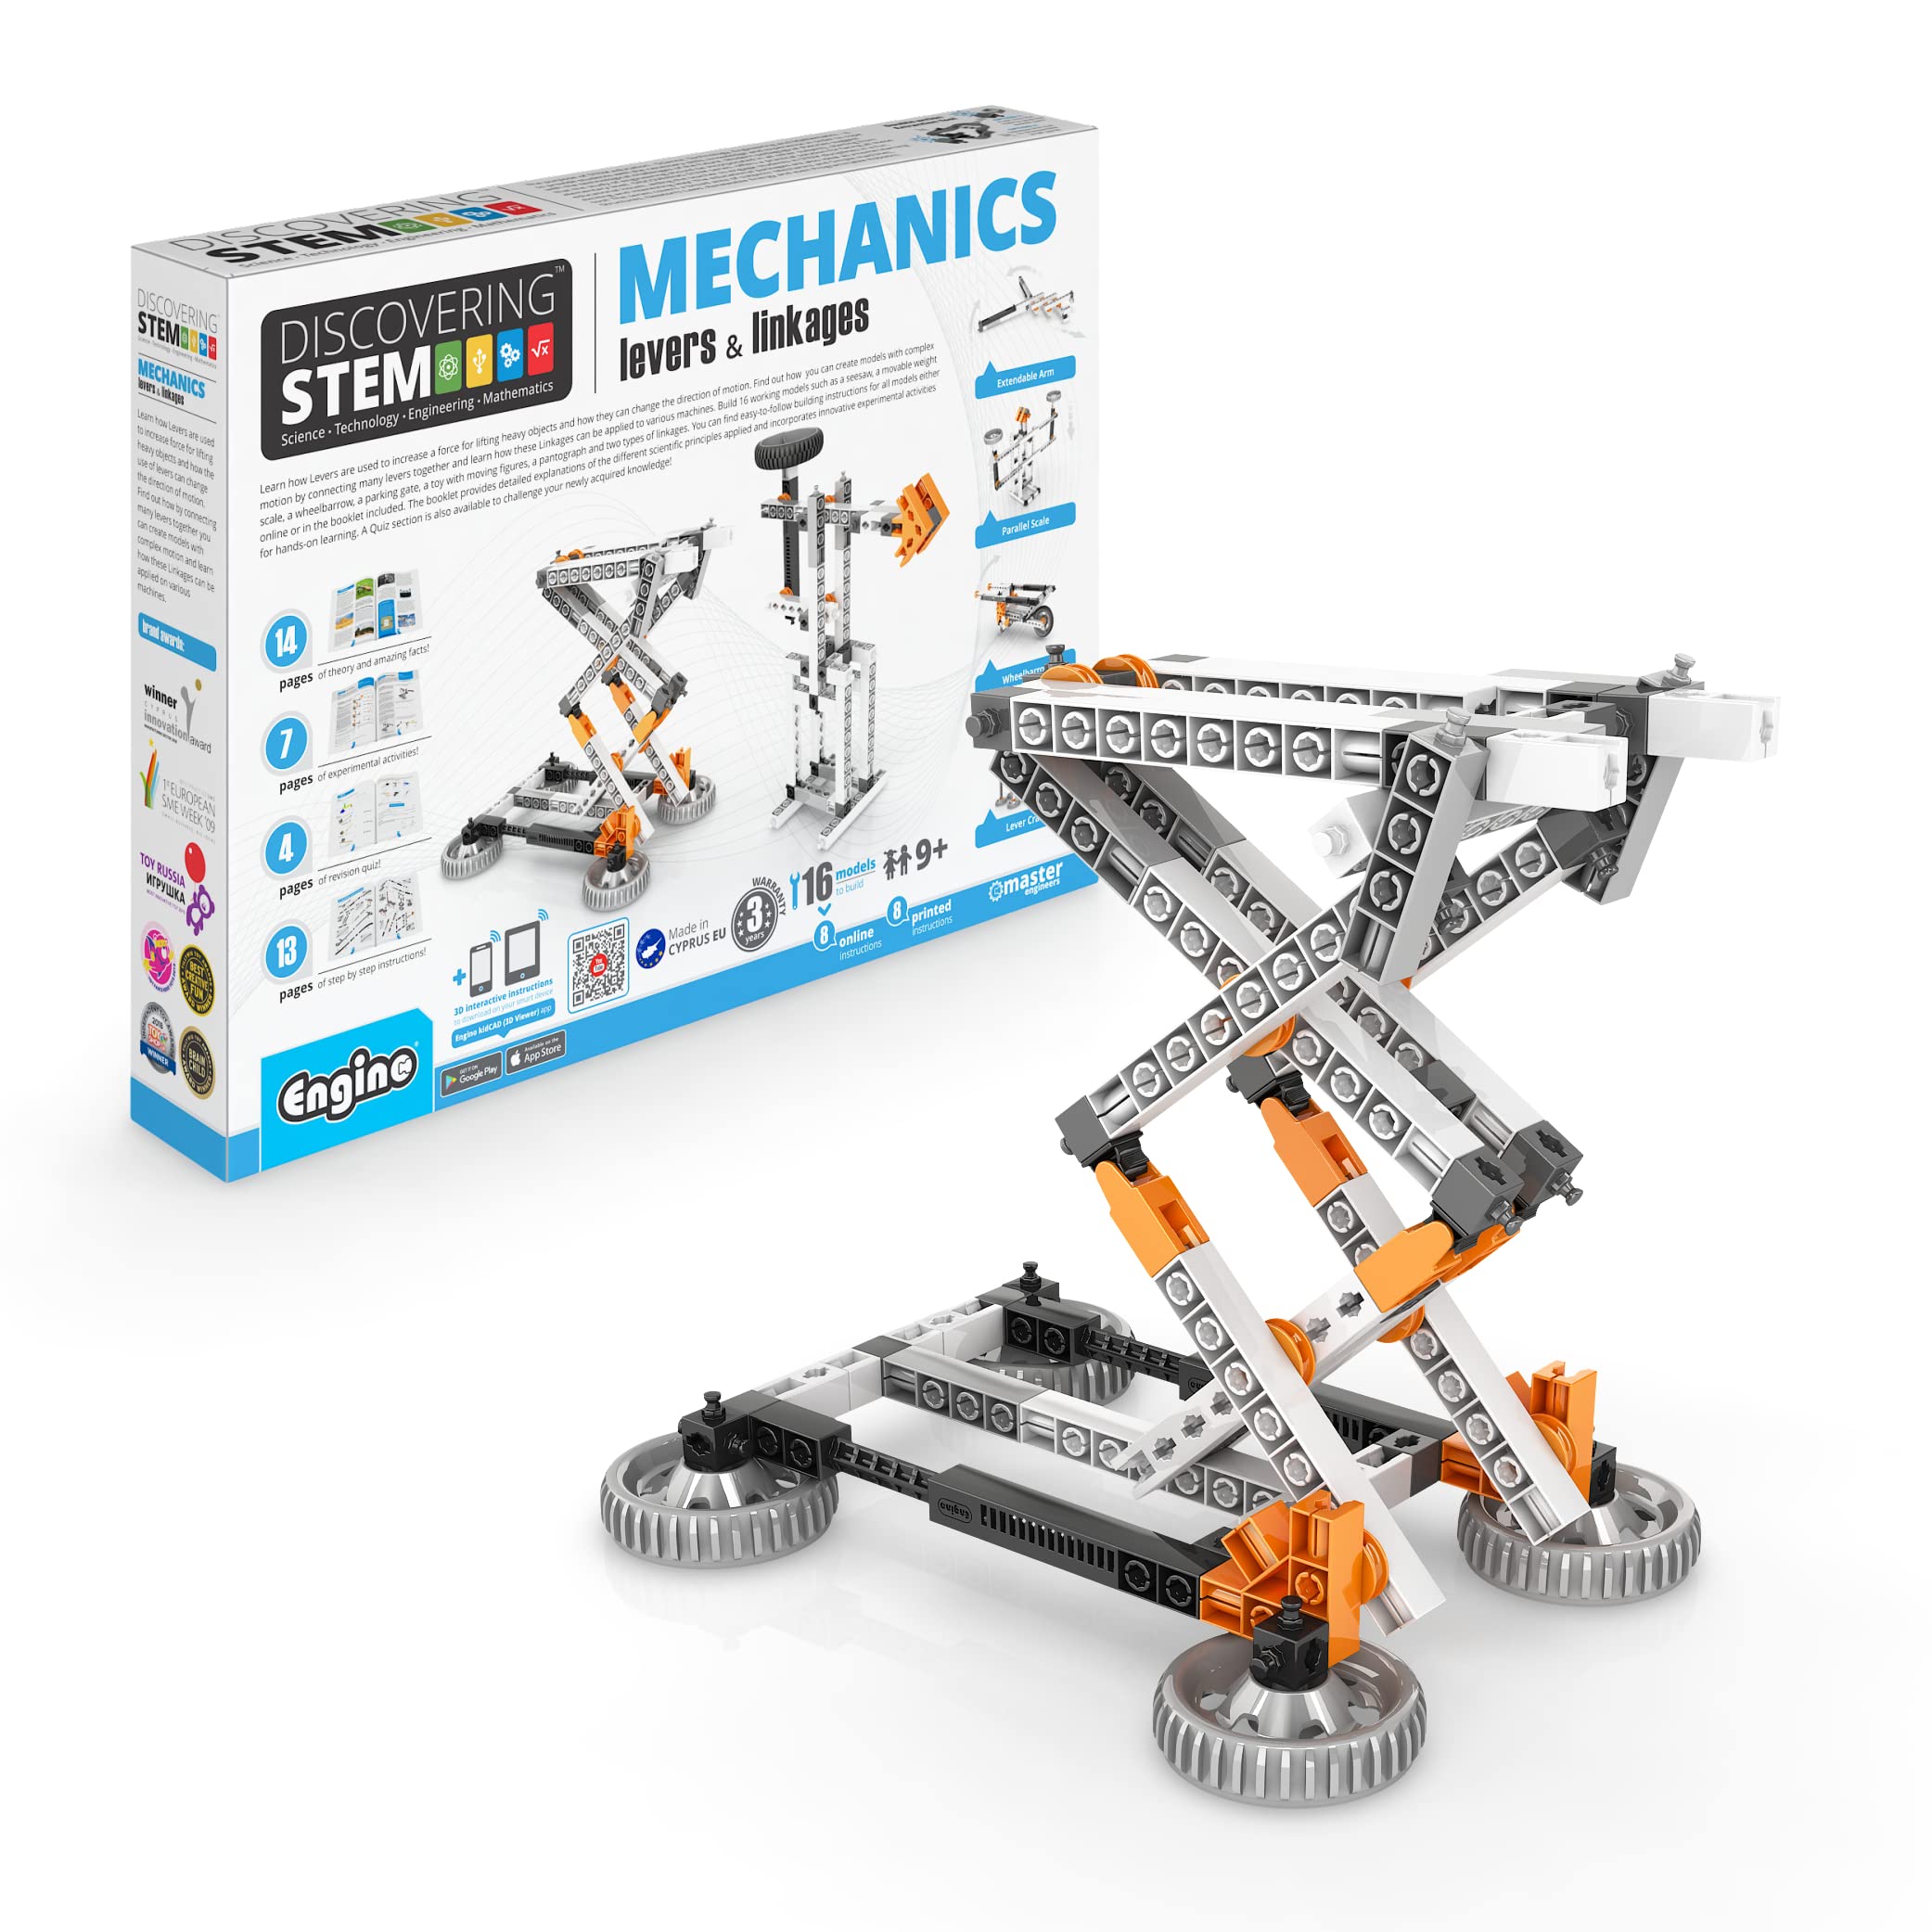 Engino- Stem Toys, 16 Models in 1 Stem, Mechanics Levers & Linkages, Construction Toys for Kids 9+, Fun Educational Toys, Gift for Boys & Girls